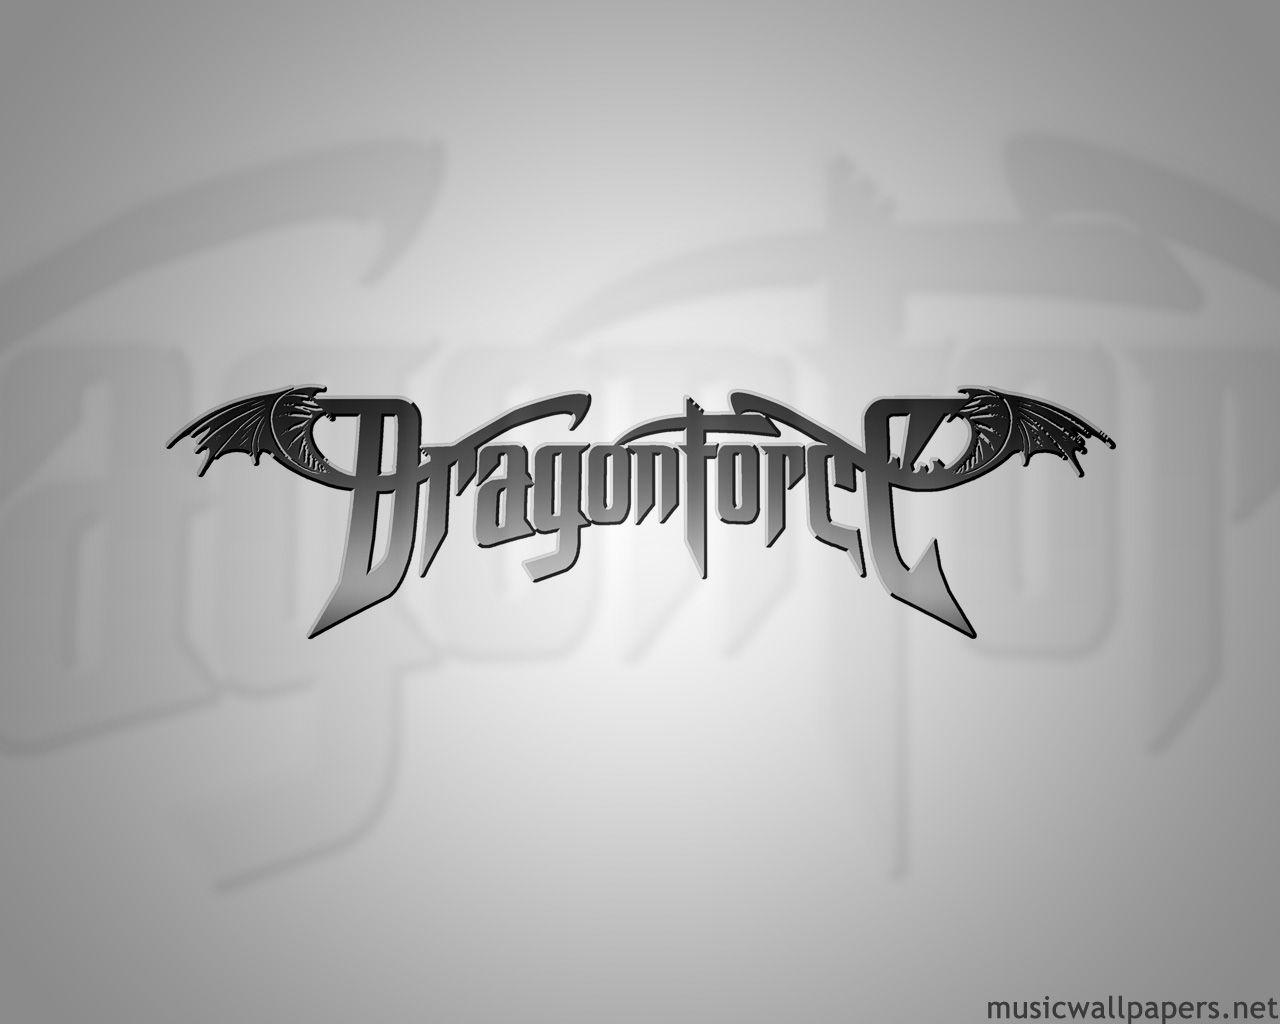 DragonForce. A freaking awesome power metal band!!!! Love it. If you